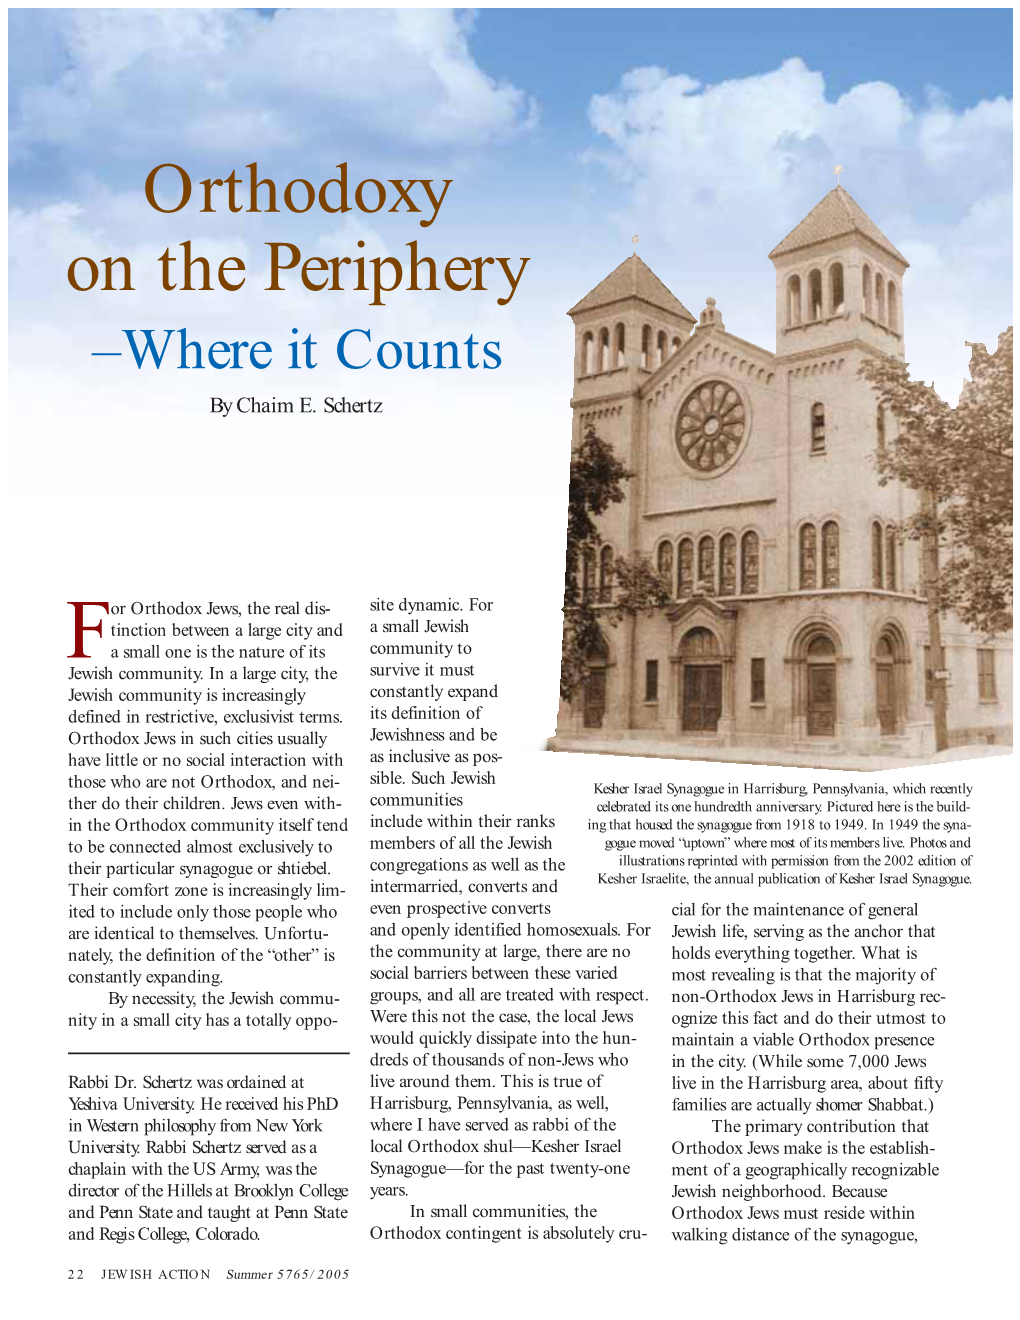 Orthodoxy on the Periphery –Where It Counts by Chaim E